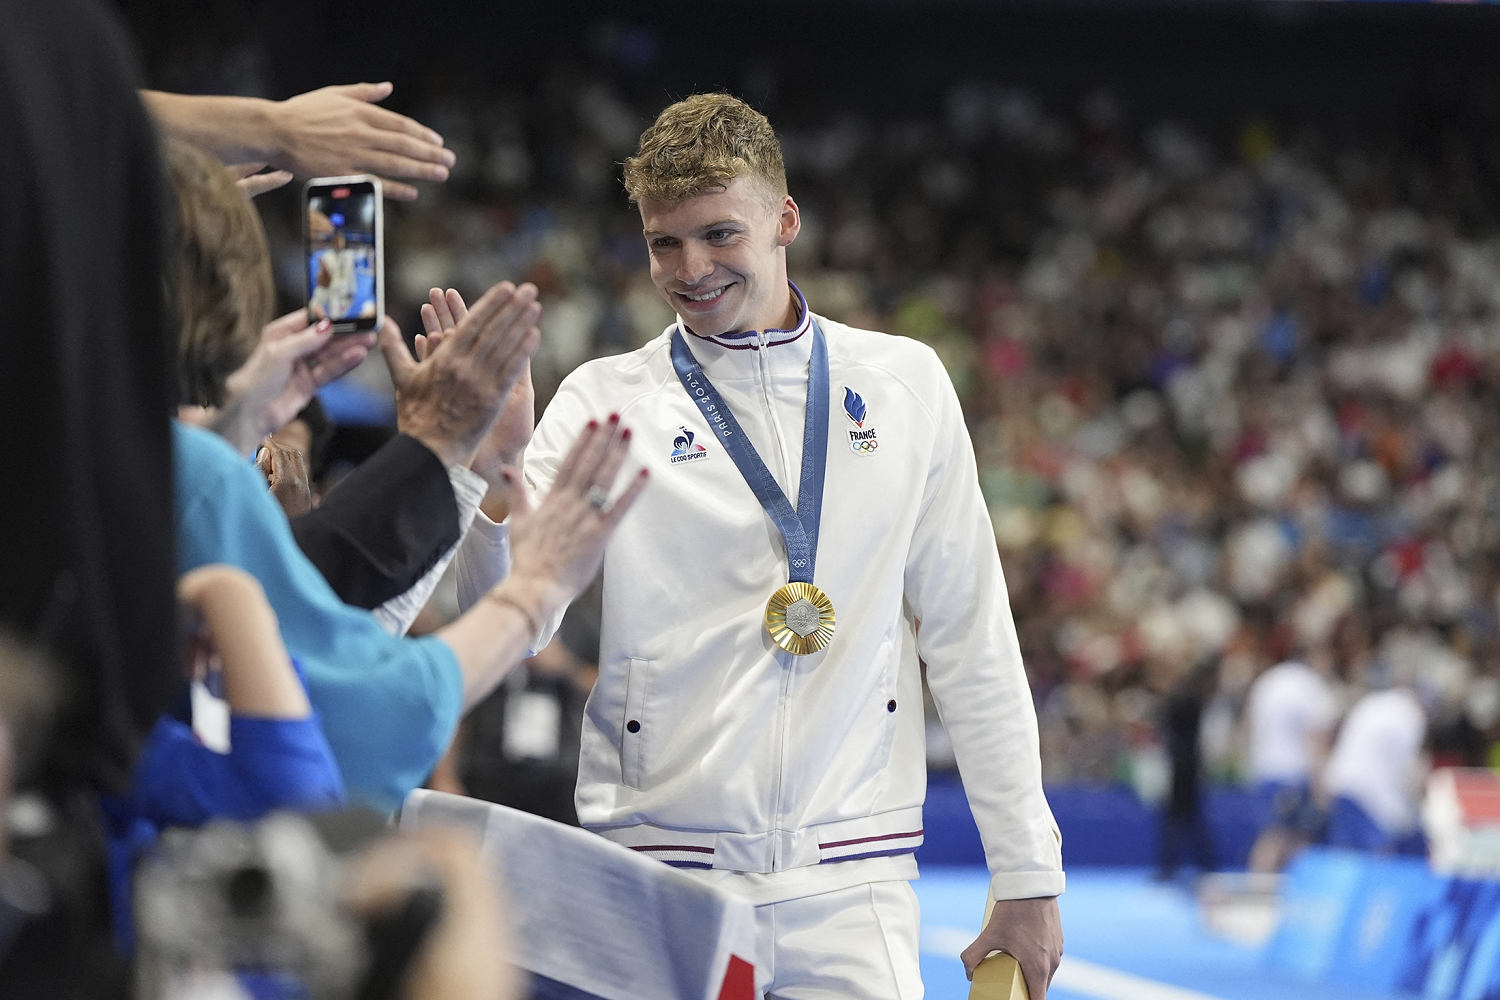 Léon Marchand wins Olympic gold in 400 IM and the admiration of France